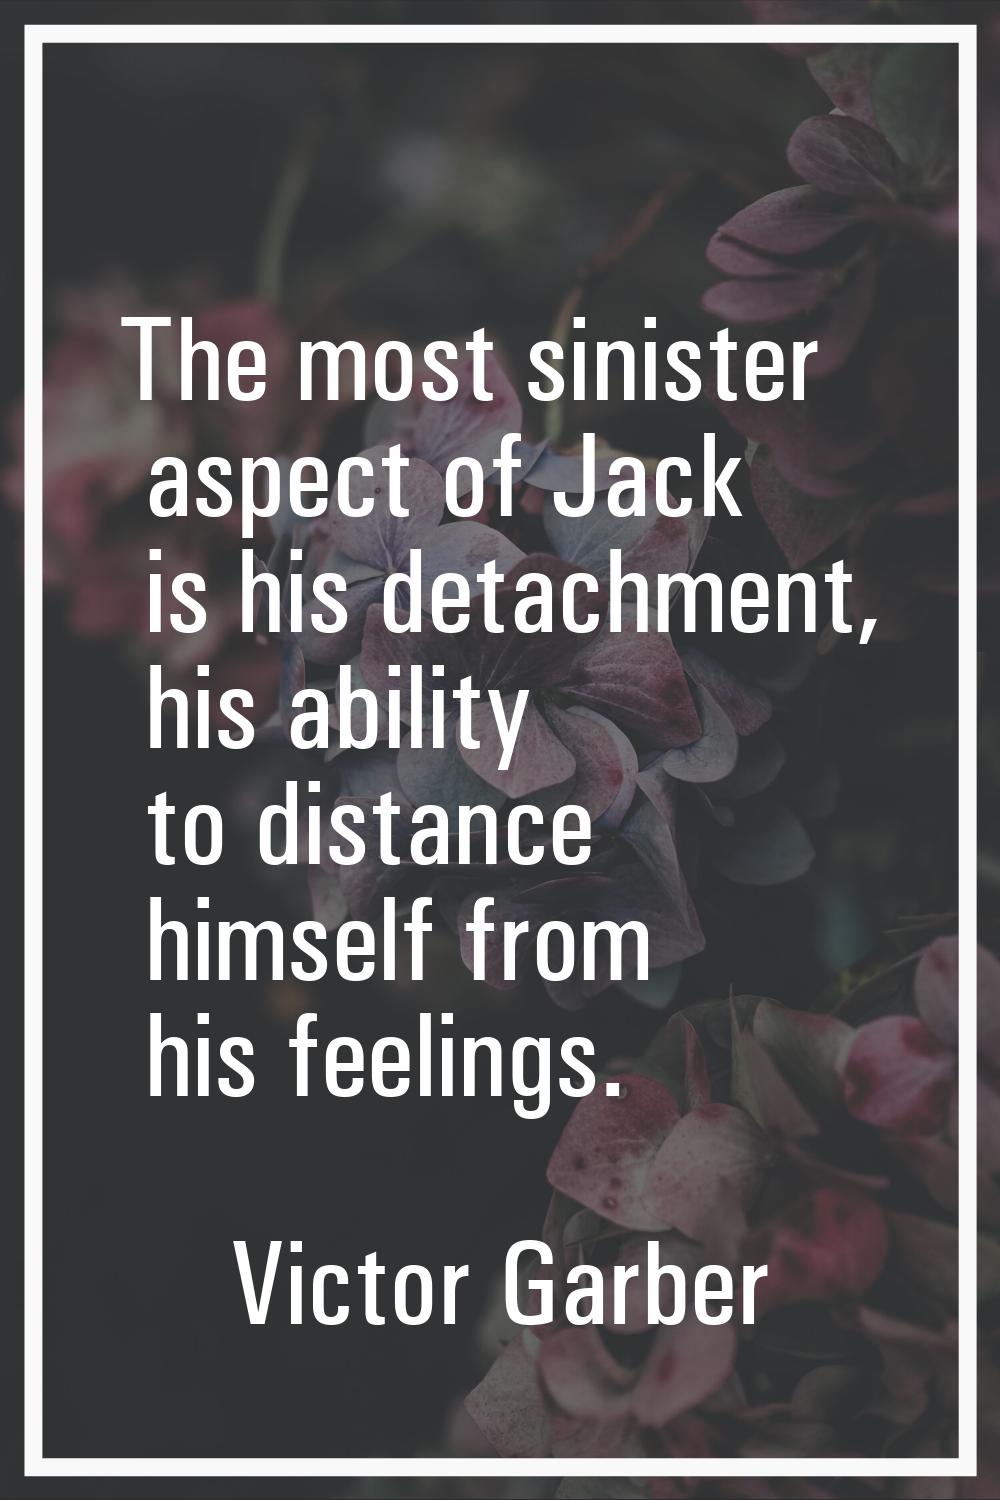 The most sinister aspect of Jack is his detachment, his ability to distance himself from his feelin